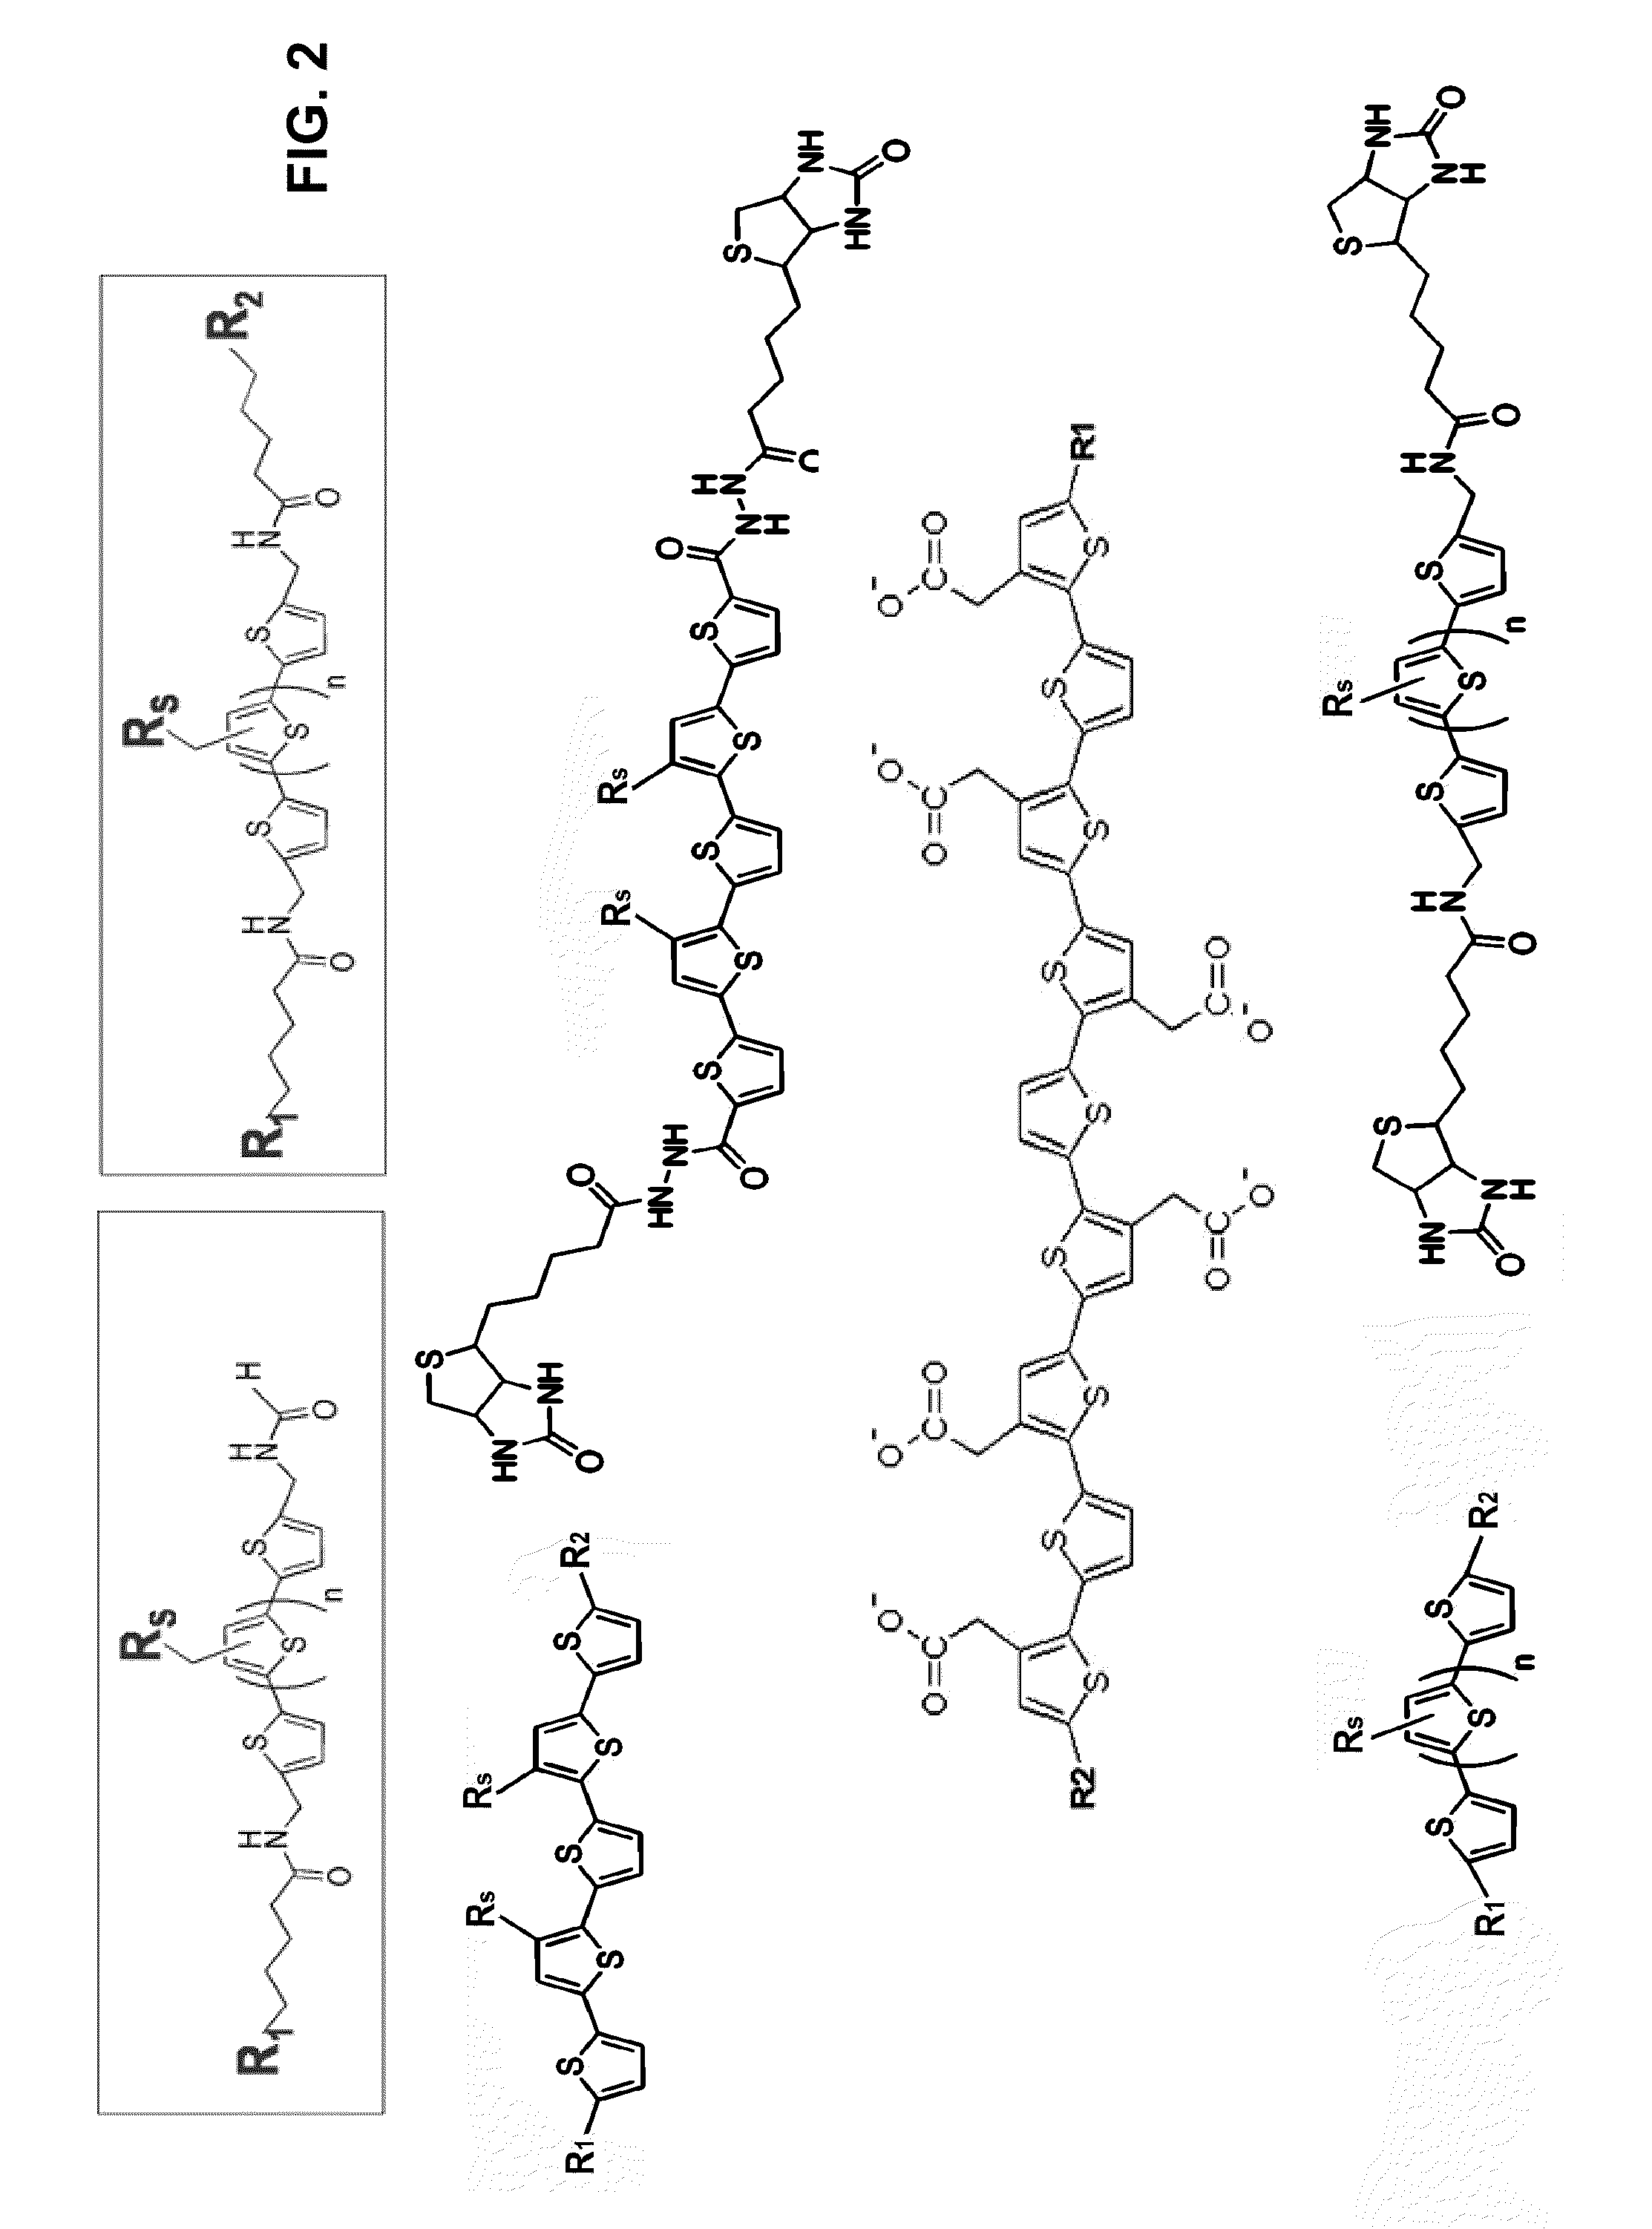 Binding of pathological forms of proteins using conjugated polyelectrolytes